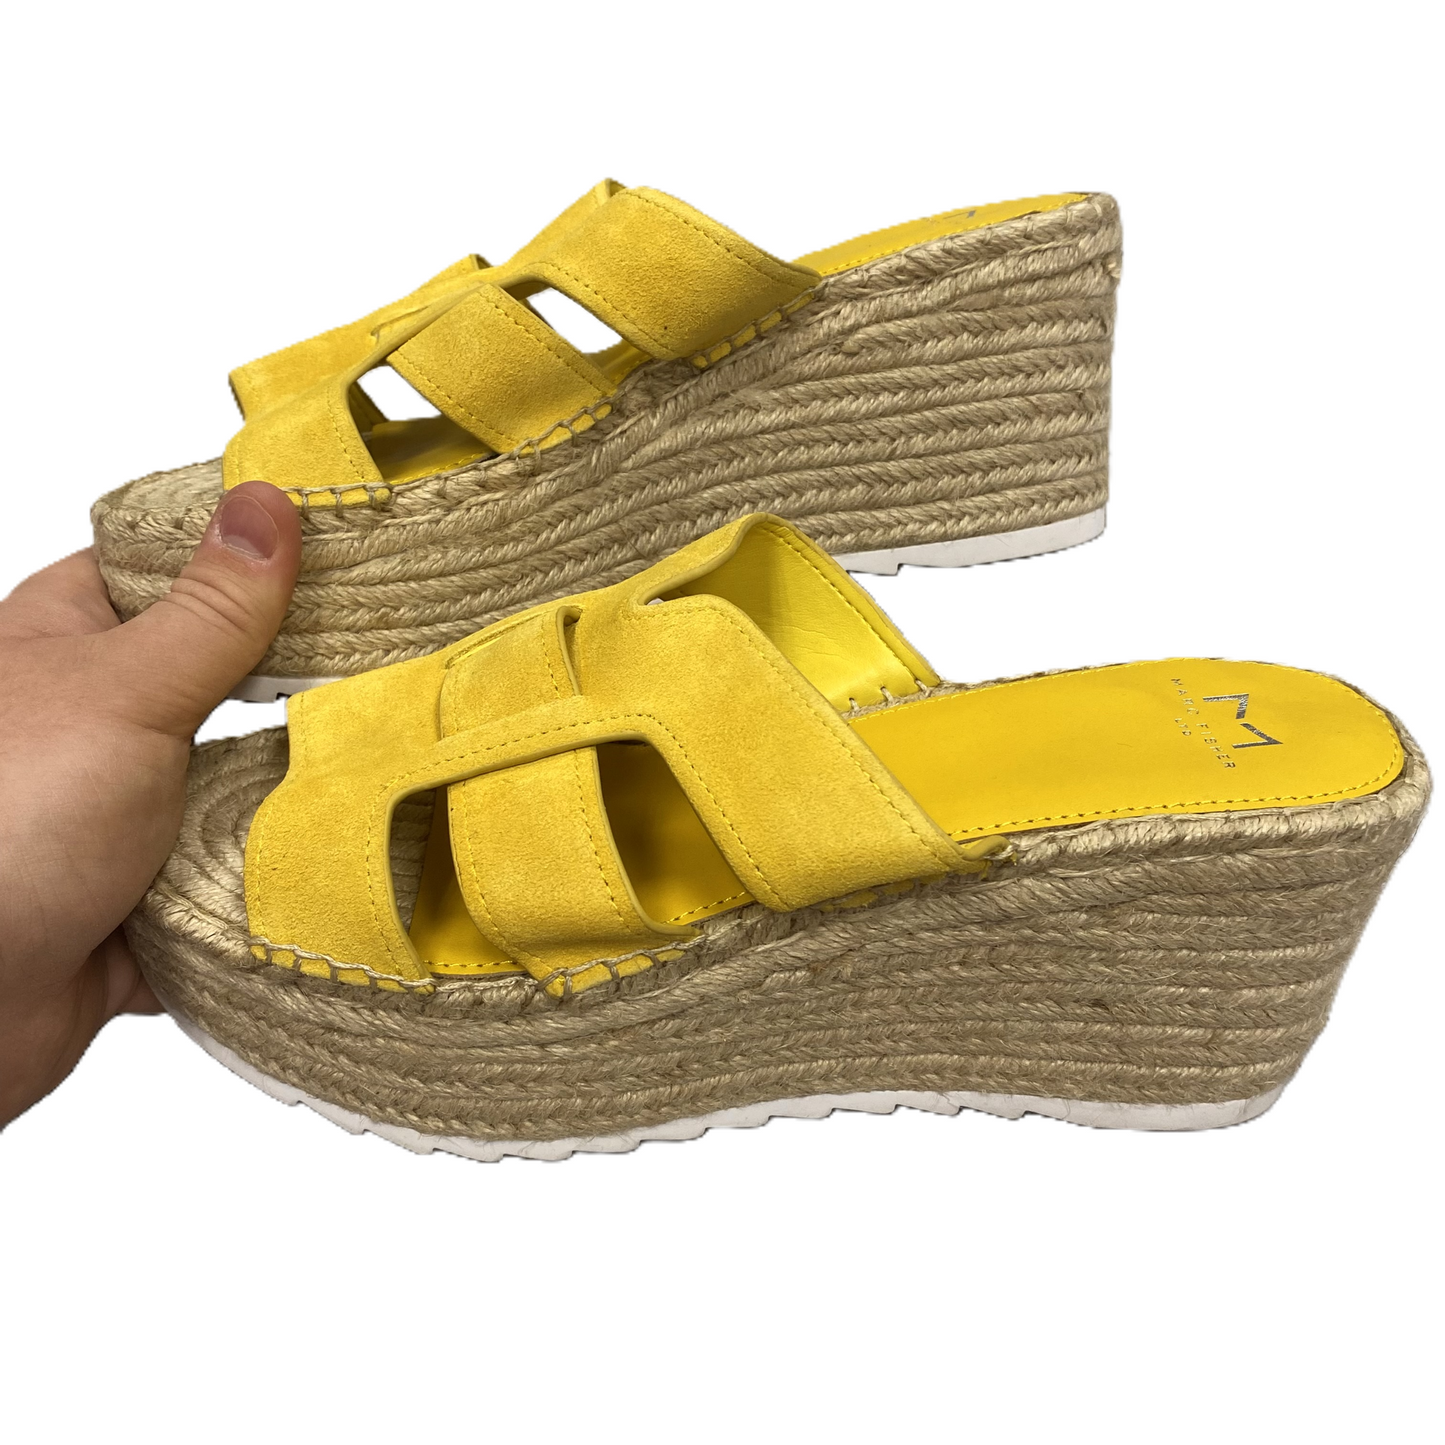 Yellow Sandals Heels Wedge By Marc Fisher, Size: 9.5